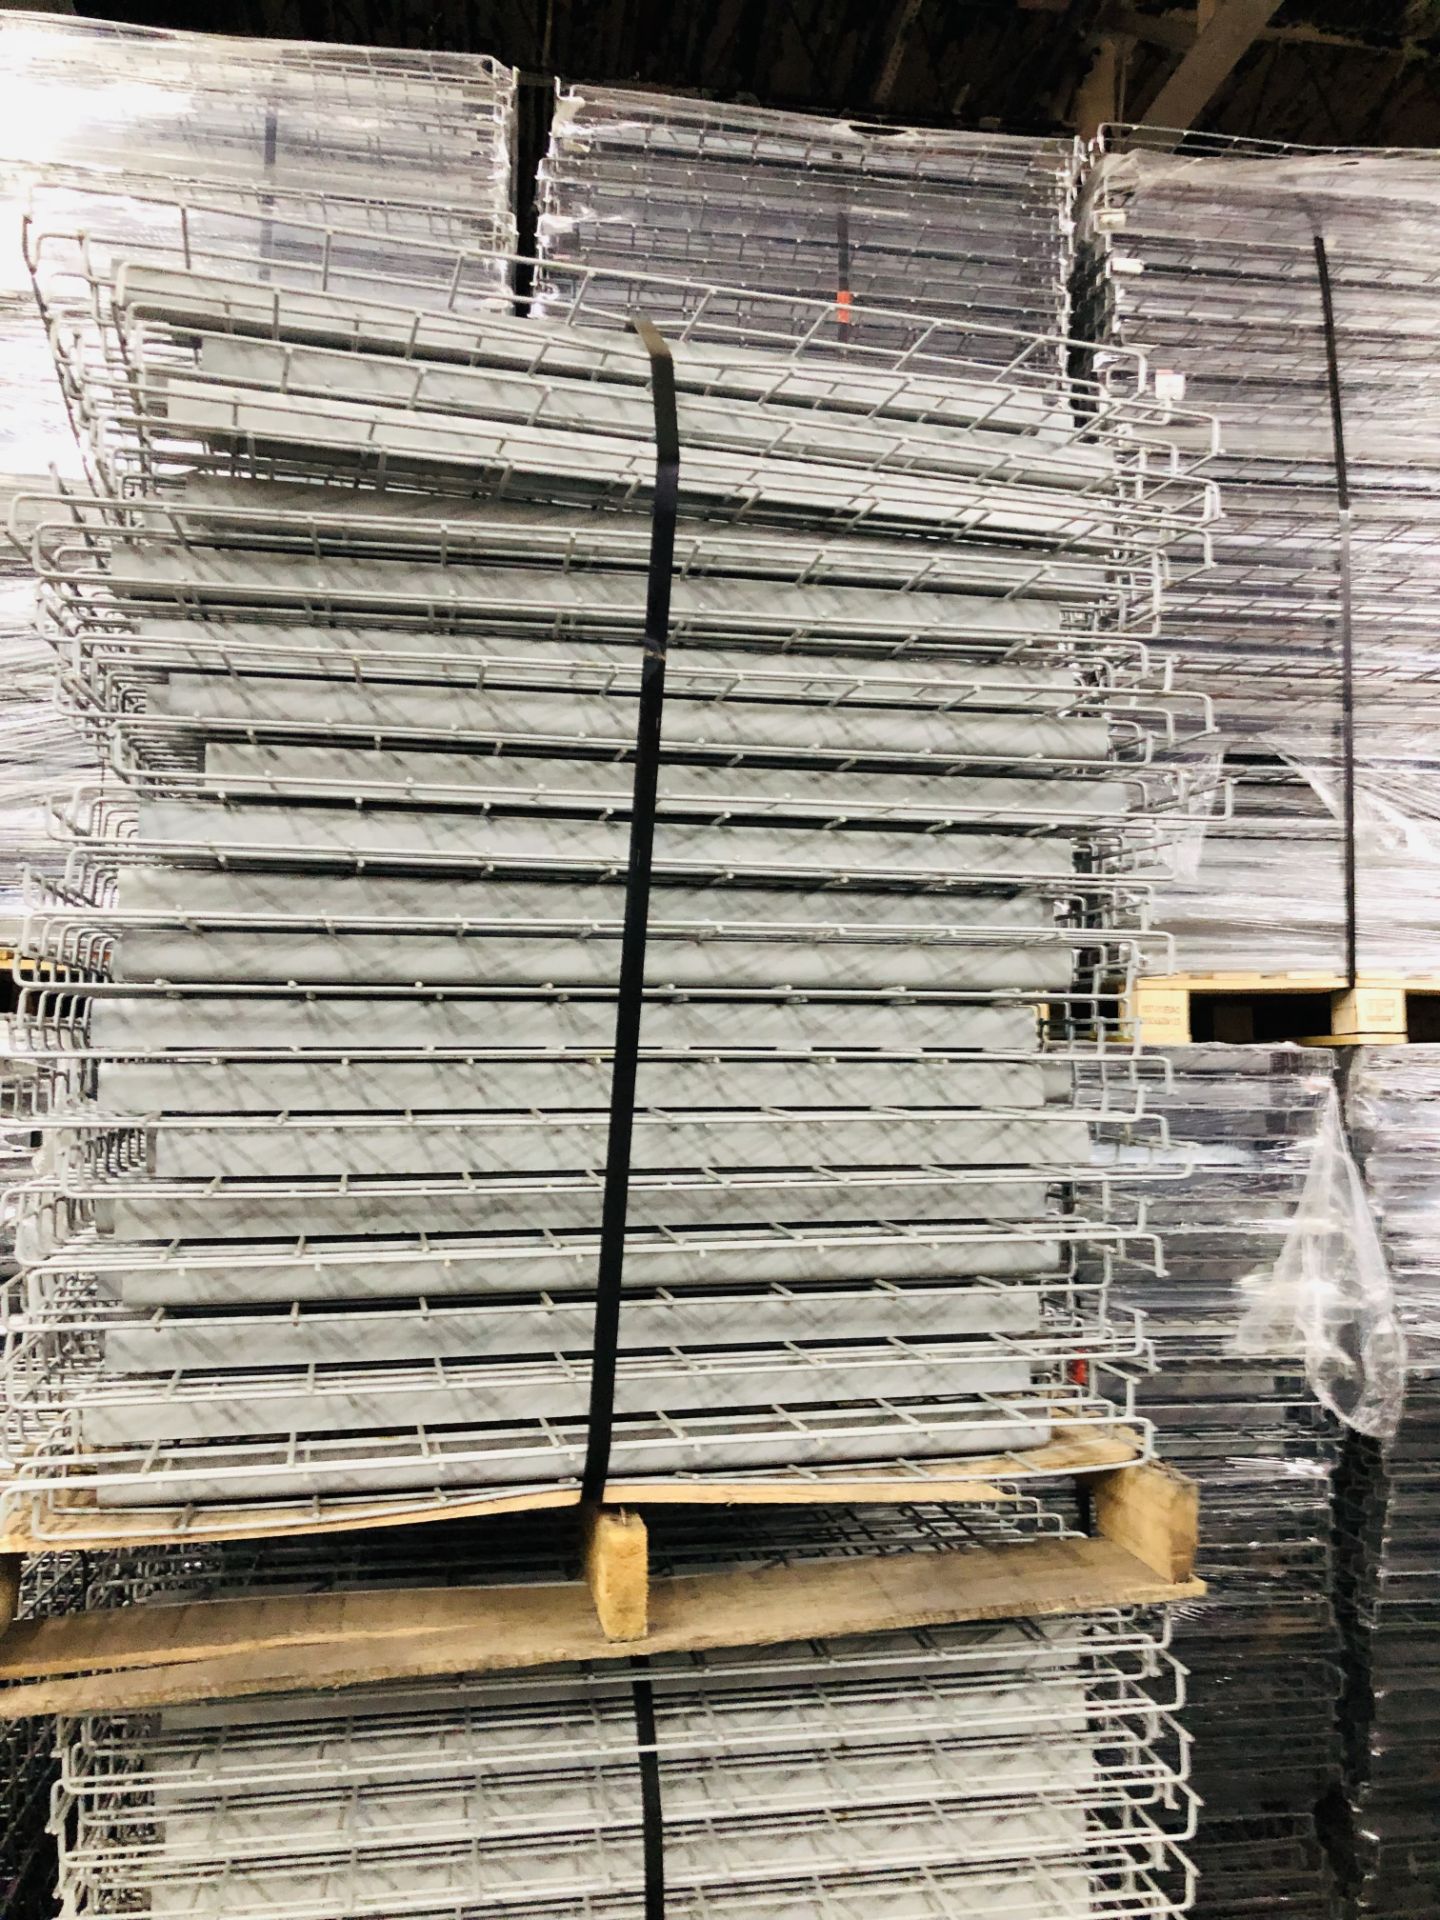 USED 80 PCS OF STANDARD 36" X 46" WIREDECK - Image 2 of 3